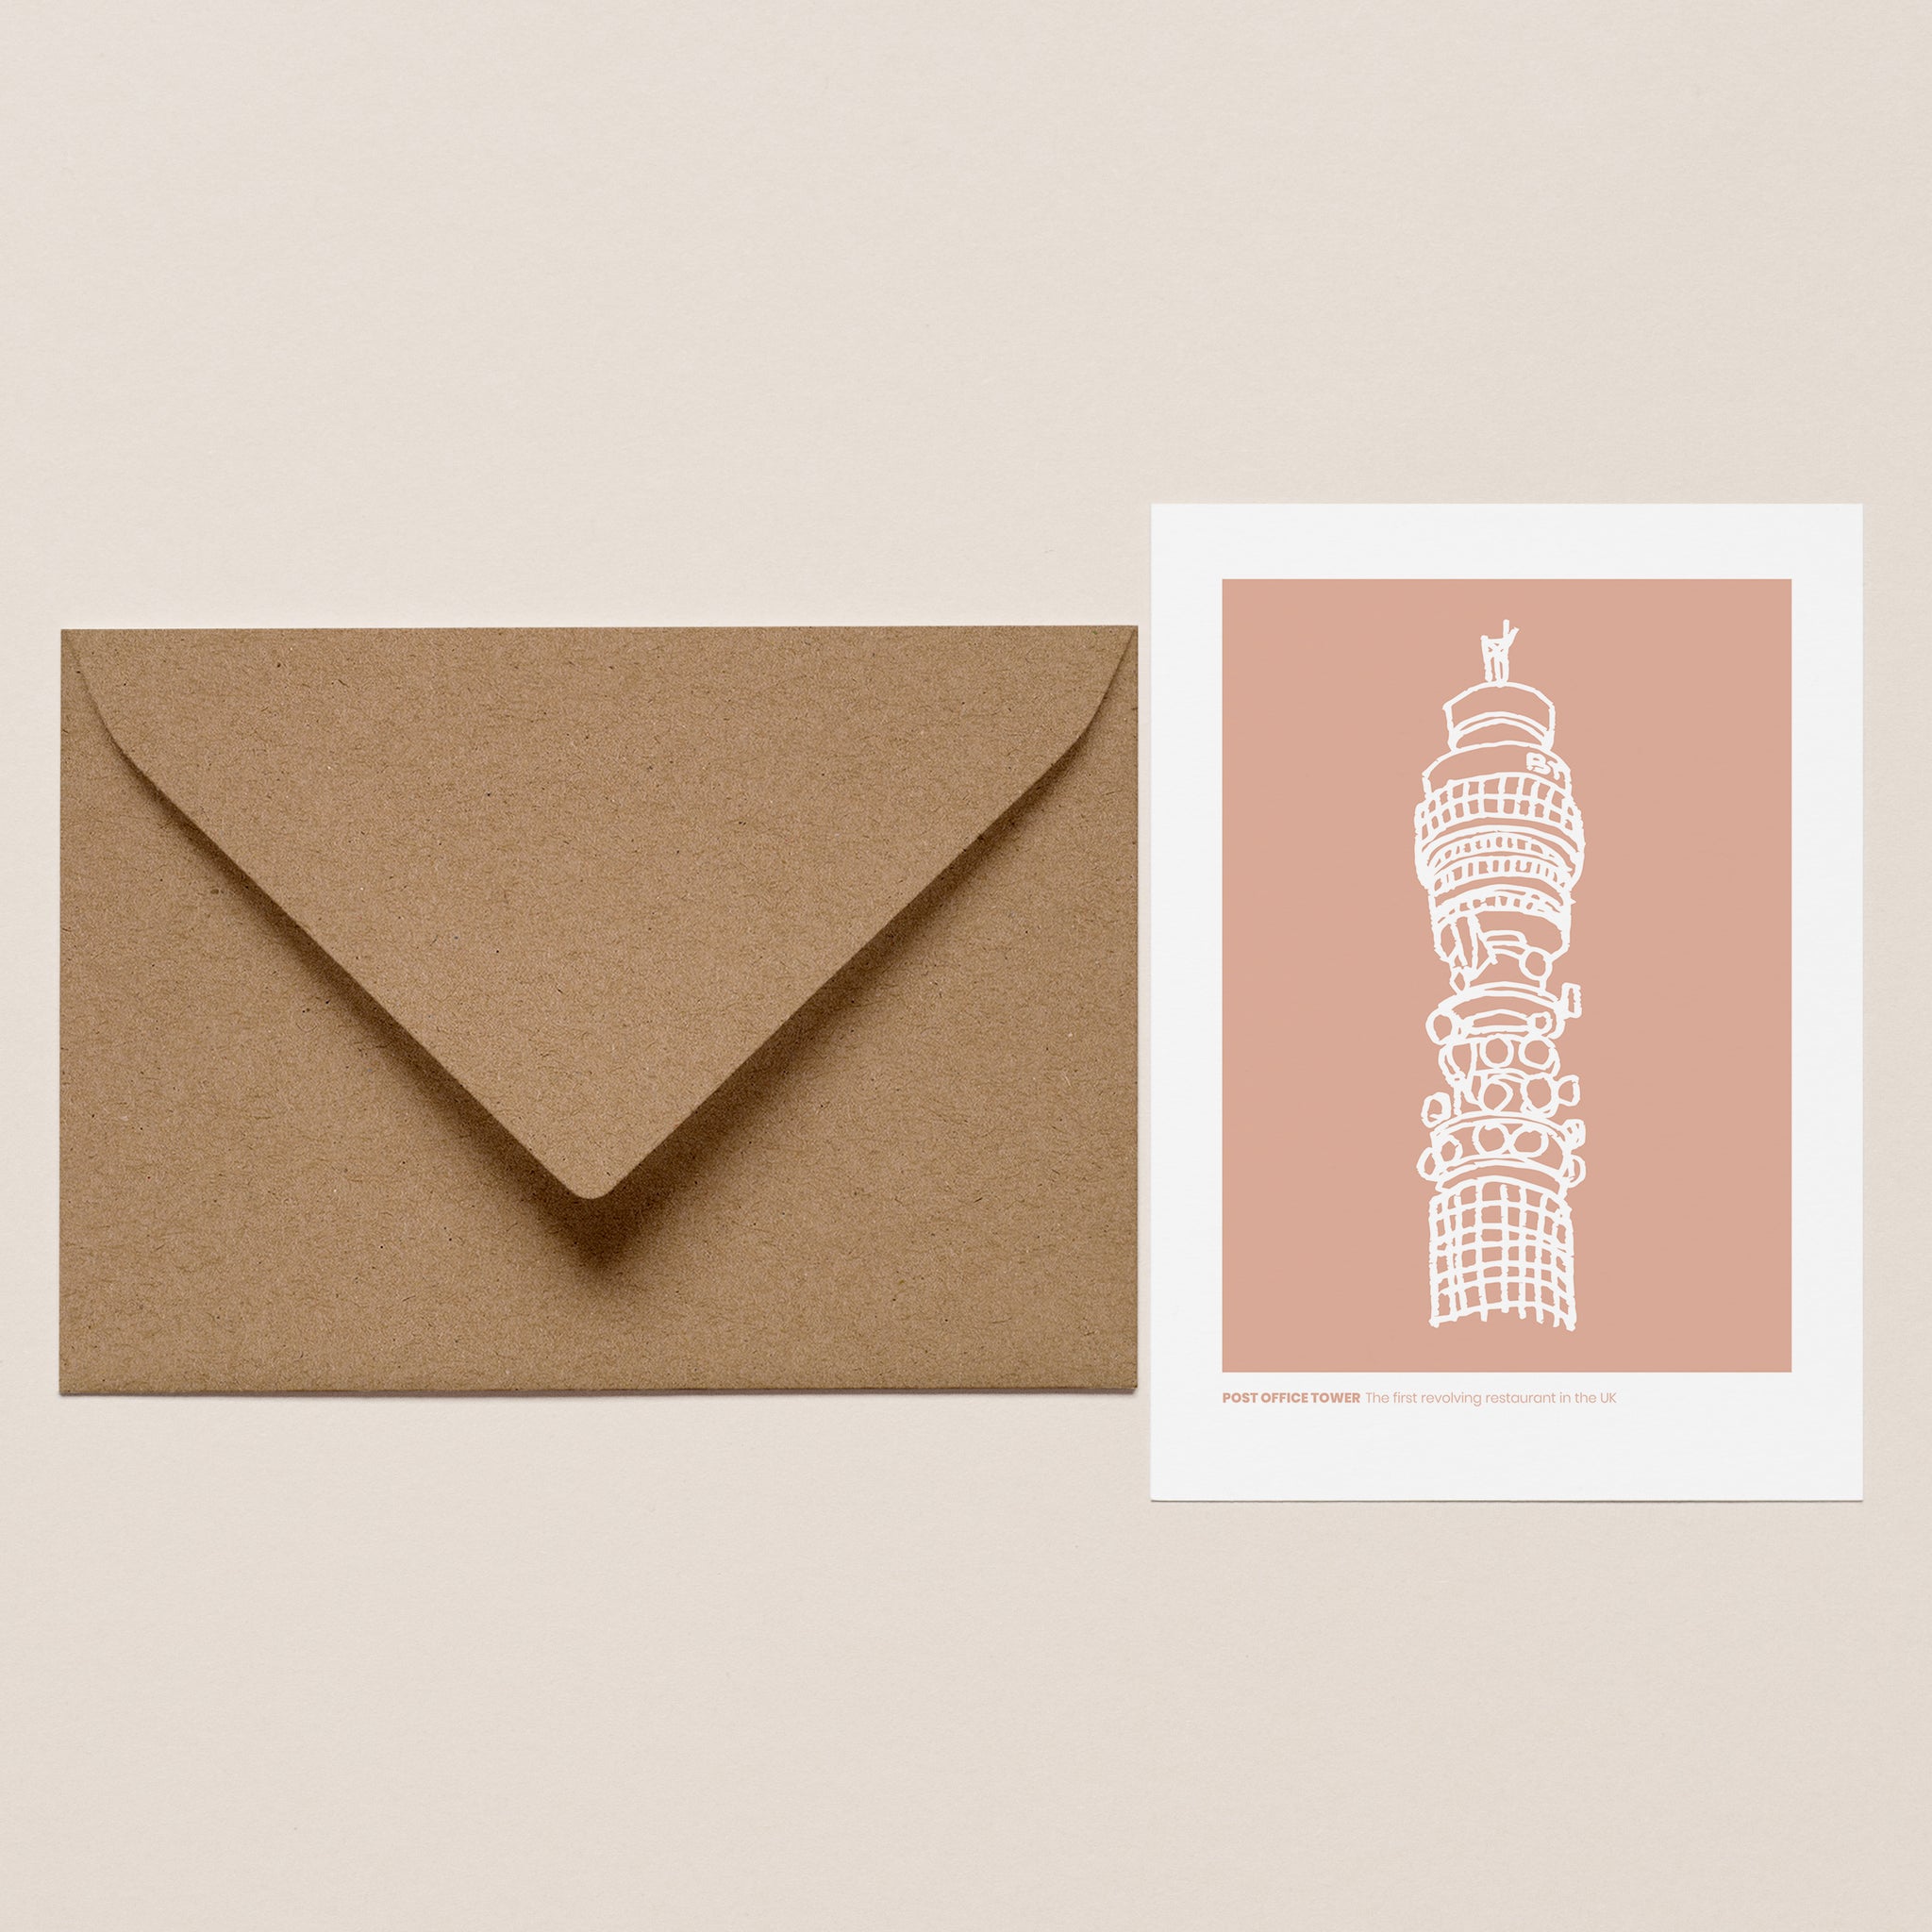 Post Office Tower Greeting Card